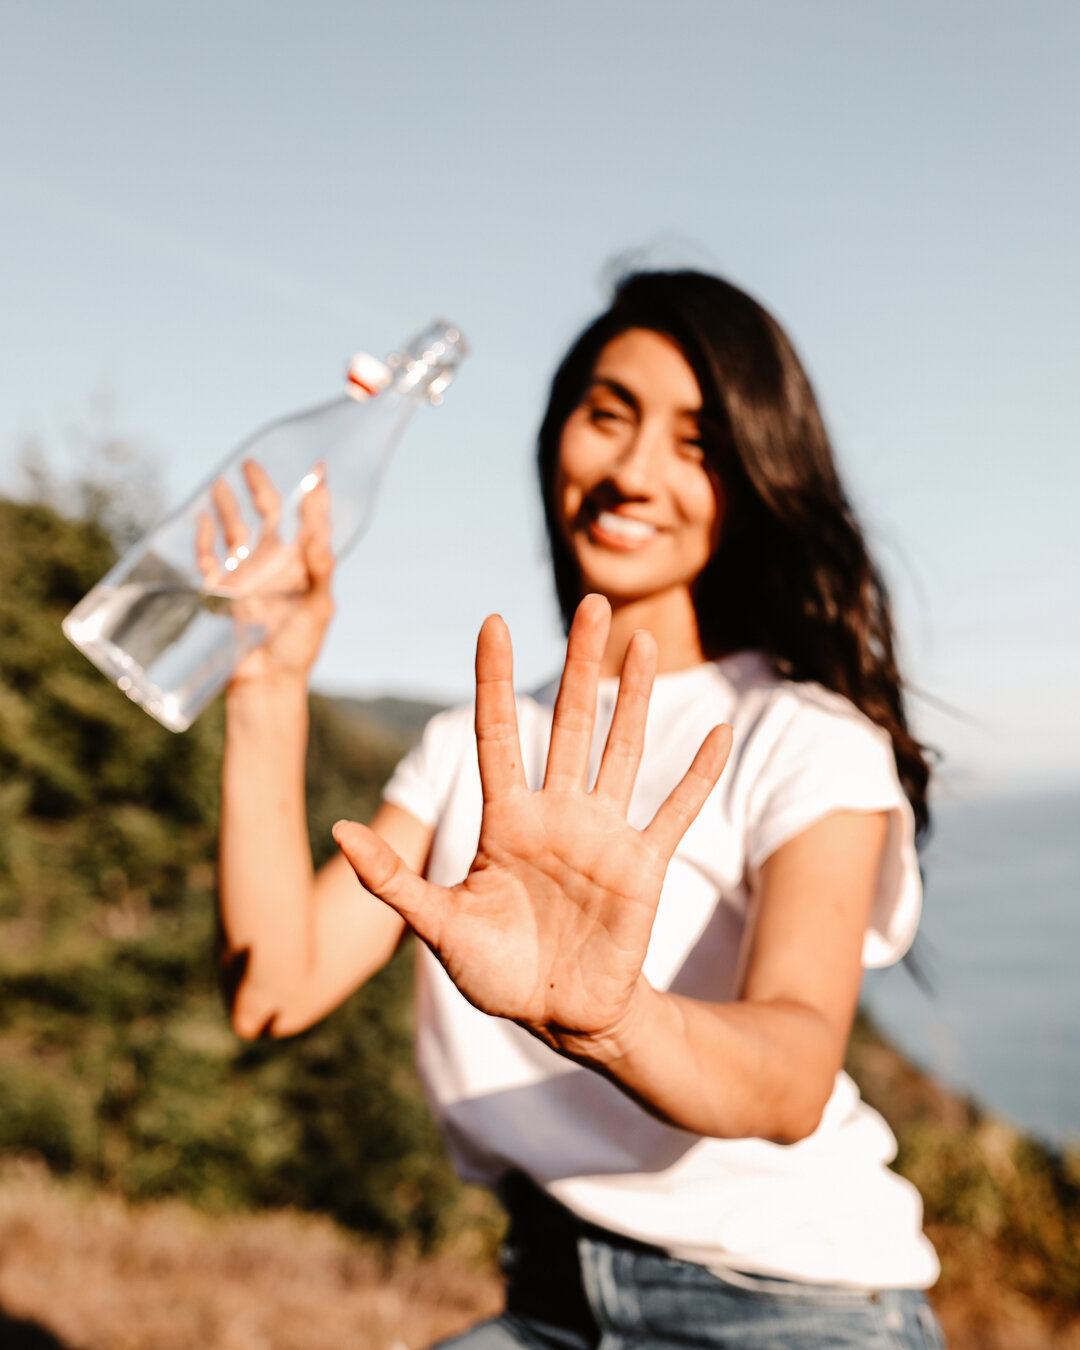 Five unorthodox tips to help you drink more water :)⠀⠀⠀⠀⠀⠀⠀⠀⠀
⠀⠀⠀⠀⠀⠀⠀⠀⠀
*Buy and decorate your water bottle and keep it with you at all times.⠀⠀⠀⠀⠀⠀⠀⠀⠀
⠀⠀⠀⠀⠀⠀⠀⠀⠀
*If you have a pet drink, whenever they drink. ⠀⠀⠀⠀⠀⠀⠀⠀⠀
⠀⠀⠀⠀⠀⠀⠀⠀⠀
*Add fruit, herbs or 